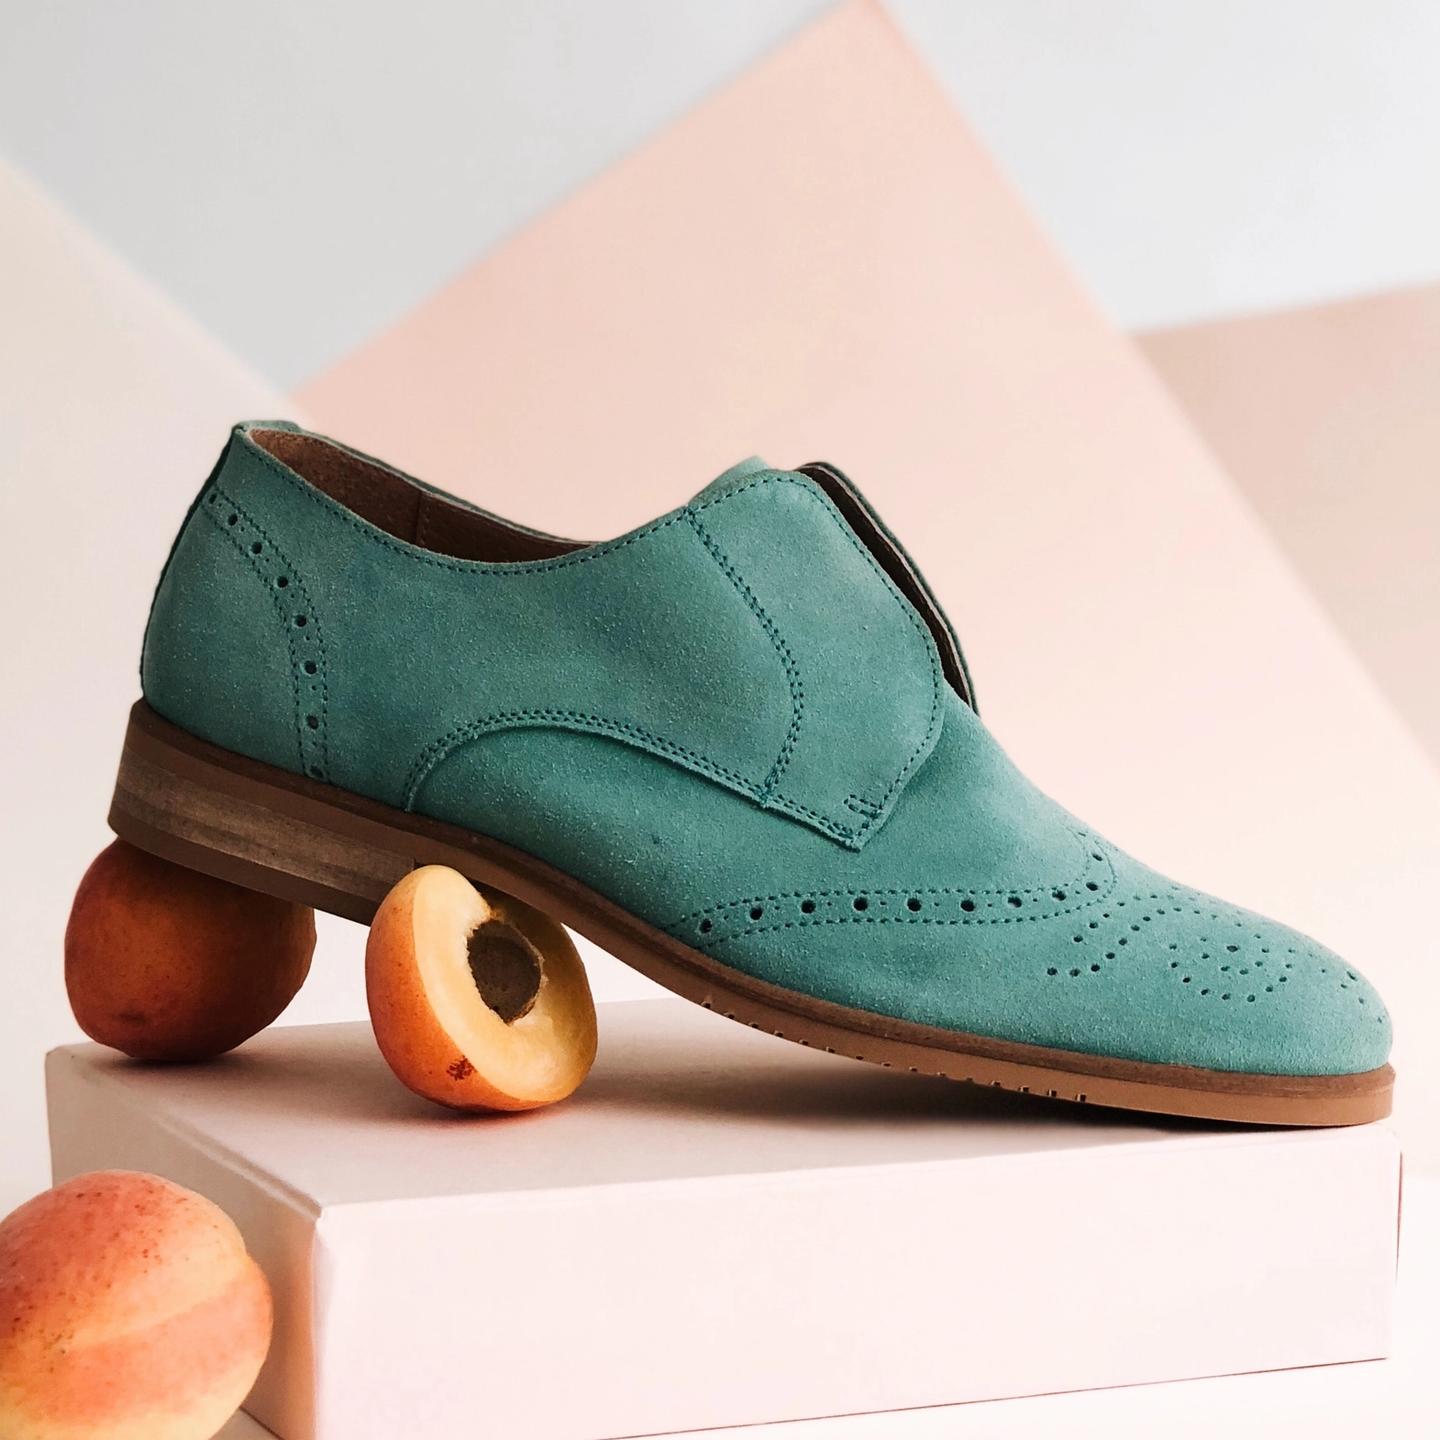 A green shoe with apricots beneath it​​​​‌﻿‍﻿​‍​‍‌‍﻿﻿‌﻿​‍‌‍‍‌‌‍‌﻿‌‍‍‌‌‍﻿‍​‍​‍​﻿‍‍​‍​‍‌﻿​﻿‌‍​‌‌‍﻿‍‌‍‍‌‌﻿‌​‌﻿‍‌​‍﻿‍‌‍‍‌‌‍﻿﻿​‍​‍​‍﻿​​‍​‍‌‍‍​‌﻿​‍‌‍‌‌‌‍‌‍​‍​‍​﻿‍‍​‍​‍‌‍‍​‌﻿‌​‌﻿‌​‌﻿​​​﻿‍‍​‍﻿﻿​‍﻿﻿‌‍﻿​‌‍﻿﻿‌‍​﻿‌‍​‌‌‍﻿​‌‍‍​‌‍﻿﻿‌﻿​﻿‌﻿‌​​﻿‍‍​﻿​﻿​﻿​﻿​﻿​﻿​﻿​﻿​‍﻿﻿‌‍‍‌‌‍﻿‍‌﻿‌​‌‍‌‌‌‍﻿‍‌﻿‌​​‍﻿﻿‌‍‌‌‌‍‌​‌‍‍‌‌﻿‌​​‍﻿﻿‌‍﻿‌‌‍﻿﻿‌‍‌​‌‍‌‌​﻿﻿‌‌﻿​​‌﻿​‍‌‍‌‌‌﻿​﻿‌‍‌‌‌‍﻿‍‌﻿‌​‌‍​‌‌﻿‌​‌‍‍‌‌‍﻿﻿‌‍﻿‍​﻿‍﻿‌‍‍‌‌‍‌​​﻿﻿‌‌‍​‍​﻿‍‌​﻿‌‌​﻿‌‍‌‍​﻿‌‍‌‍​﻿‌﻿‌‍​‍​‍﻿‌‌‍​‌​﻿‌﻿‌‍​‍​﻿‌﻿​‍﻿‌​﻿‌​‌‍‌‌​﻿‌‌​﻿‌‍​‍﻿‌‌‍​‌​﻿​‌​﻿‌‍‌‍‌‍​‍﻿‌‌‍​‍‌‍​‌‌‍‌​​﻿‍​‌‍‌‌‌‍‌‌​﻿​﻿​﻿‍‌​﻿​‍‌‍‌‌​﻿​﻿​﻿‌​​﻿‍﻿‌﻿‌​‌﻿‍‌‌﻿​​‌‍‌‌​﻿﻿‌‌﻿​﻿‌‍‍​‌‍﻿﻿‌‍‌‌​﻿‍﻿‌﻿​​‌‍​‌‌﻿‌​‌‍‍​​﻿﻿‌‌‍﻿‌‌‍‌‌‌‍‌​‌‍‍‌‌‍​‌​‍‌‌​﻿‌‌‌​​‍‌‌﻿﻿‌‍‍﻿‌‍‌‌‌﻿‍‌​‍‌‌​﻿​﻿‌​‌​​‍‌‌​﻿​﻿‌​‌​​‍‌‌​﻿​‍​﻿​‍​﻿‌‍​﻿​​​﻿​​‌‍​﻿‌‍‌‌​﻿​​​﻿​‍‌‍​‌‌‍​﻿‌‍​‌​﻿‍‌​﻿‌‌​‍‌‌​﻿​‍​﻿​‍​‍‌‌​﻿‌‌‌​‌​​‍﻿‍‌‍​‌‌‍﻿​‌﻿‌​​﻿﻿﻿‌‍​‍‌‍​‌‌﻿​﻿‌‍‌‌‌‌‌‌‌﻿​‍‌‍﻿​​﻿﻿‌‌‍‍​‌﻿‌​‌﻿‌​‌﻿​​​‍‌‌​﻿​﻿‌​​‌​‍‌‌​﻿​‍‌​‌‍​‍‌‌​﻿​‍‌​‌‍‌‍﻿​‌‍﻿﻿‌‍​﻿‌‍​‌‌‍﻿​‌‍‍​‌‍﻿﻿‌﻿​﻿‌﻿‌​​‍‌‌​﻿​﻿‌​​‌​﻿​﻿​﻿​﻿​﻿​﻿​﻿​﻿​‍‌‍‌‍‍‌‌‍‌​​﻿﻿‌‌‍​‍​﻿‍‌​﻿‌‌​﻿‌‍‌‍​﻿‌‍‌‍​﻿‌﻿‌‍​‍​‍﻿‌‌‍​‌​﻿‌﻿‌‍​‍​﻿‌﻿​‍﻿‌​﻿‌​‌‍‌‌​﻿‌‌​﻿‌‍​‍﻿‌‌‍​‌​﻿​‌​﻿‌‍‌‍‌‍​‍﻿‌‌‍​‍‌‍​‌‌‍‌​​﻿‍​‌‍‌‌‌‍‌‌​﻿​﻿​﻿‍‌​﻿​‍‌‍‌‌​﻿​﻿​﻿‌​​‍‌‍‌﻿‌​‌﻿‍‌‌﻿​​‌‍‌‌​﻿﻿‌‌﻿​﻿‌‍‍​‌‍﻿﻿‌‍‌‌​‍‌‍‌﻿​​‌‍​‌‌﻿‌​‌‍‍​​﻿﻿‌‌‍﻿‌‌‍‌‌‌‍‌​‌‍‍‌‌‍​‌​‍‌‌​﻿‌‌‌​​‍‌‌﻿﻿‌‍‍﻿‌‍‌‌‌﻿‍‌​‍‌‌​﻿​﻿‌​‌​​‍‌‌​﻿​﻿‌​‌​​‍‌‌​﻿​‍​﻿​‍​﻿‌‍​﻿​​​﻿​​‌‍​﻿‌‍‌‌​﻿​​​﻿​‍‌‍​‌‌‍​﻿‌‍​‌​﻿‍‌​﻿‌‌​‍‌‌​﻿​‍​﻿​‍​‍‌‌​﻿‌‌‌​‌​​‍﻿‍‌‍​‌‌‍﻿​‌﻿‌​​‍​‍‌﻿﻿‌